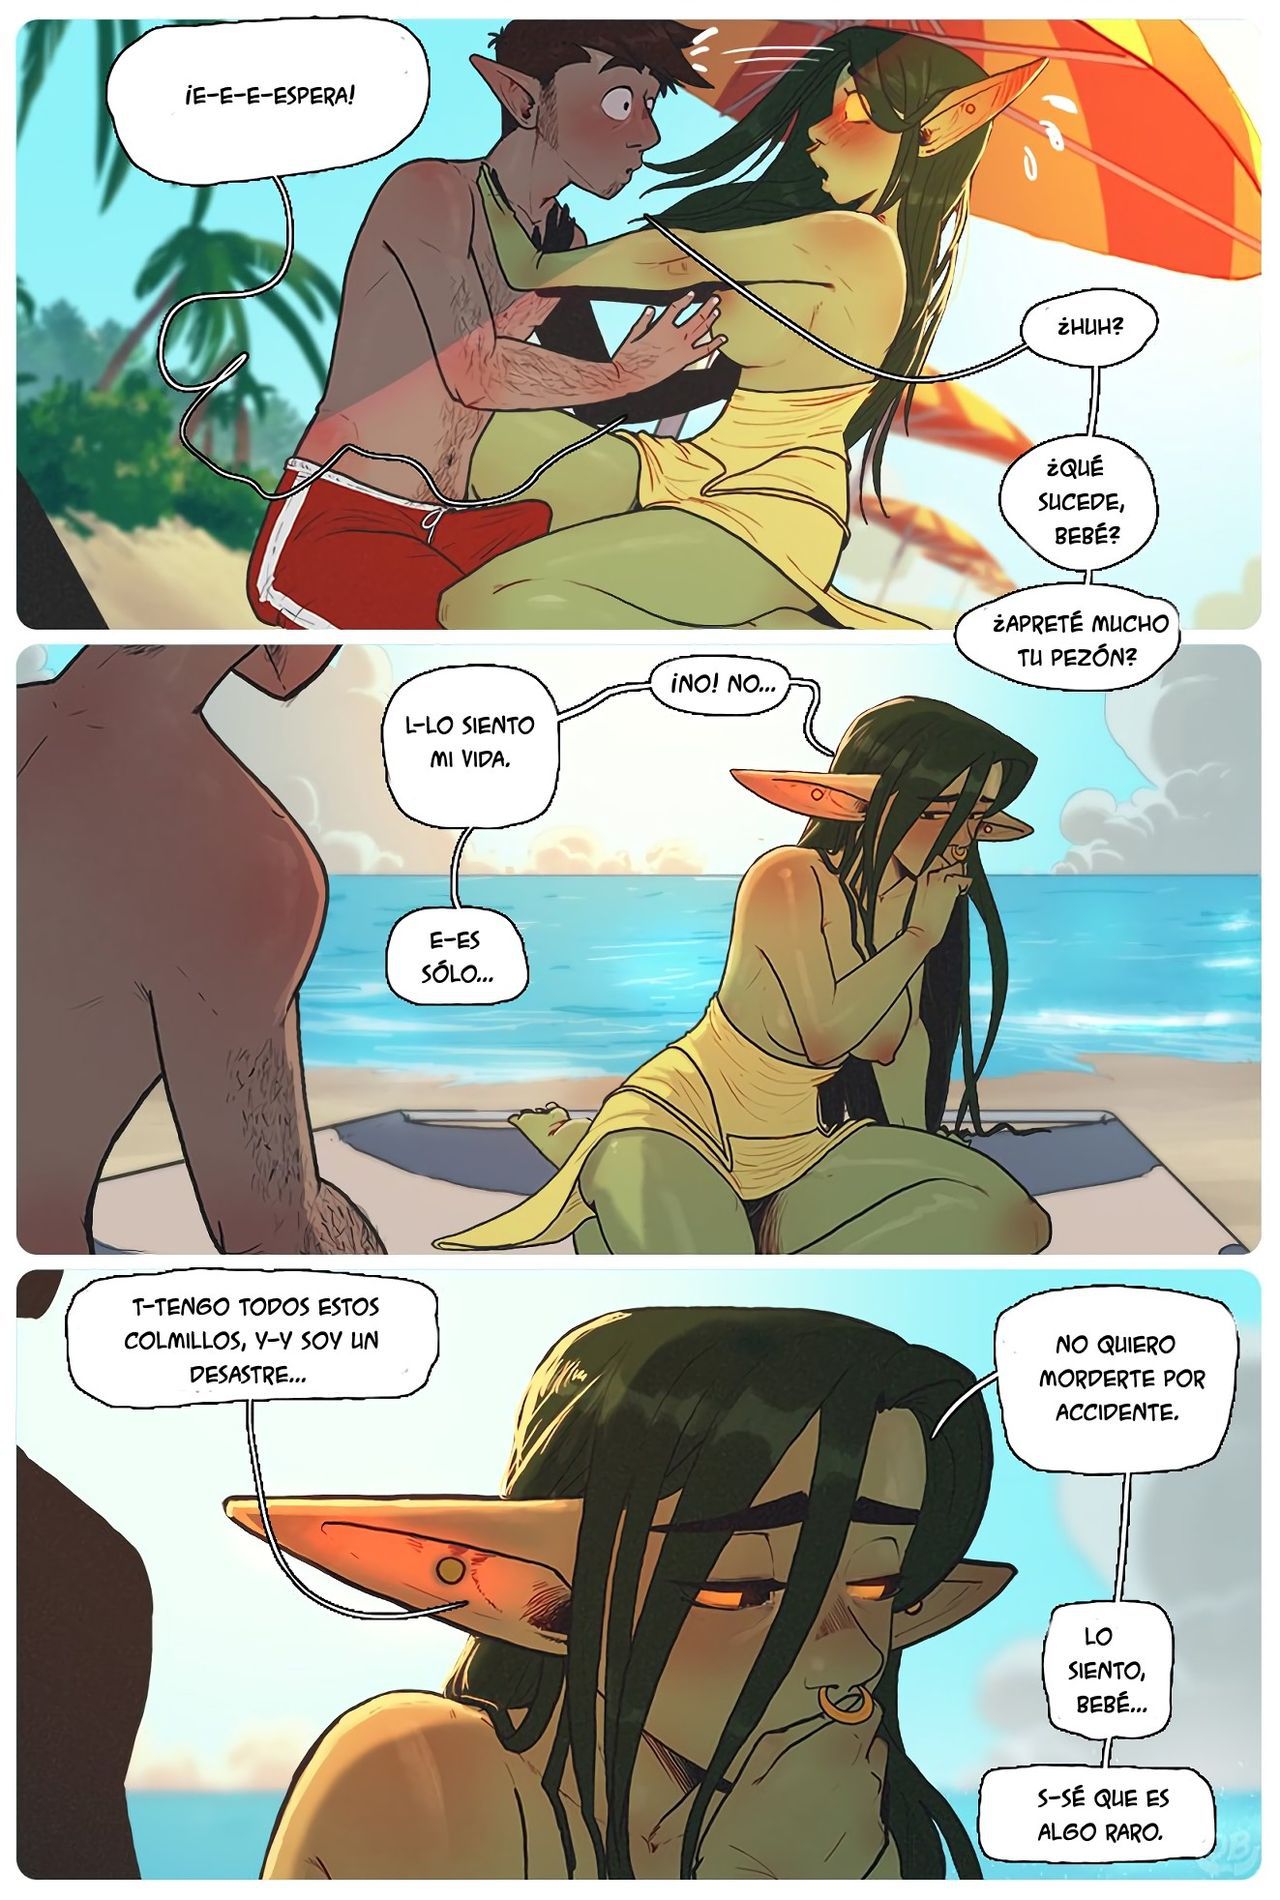 [Orcbarbies] Beach Day in Xhorhas [Ongoing] [Spanish] 10